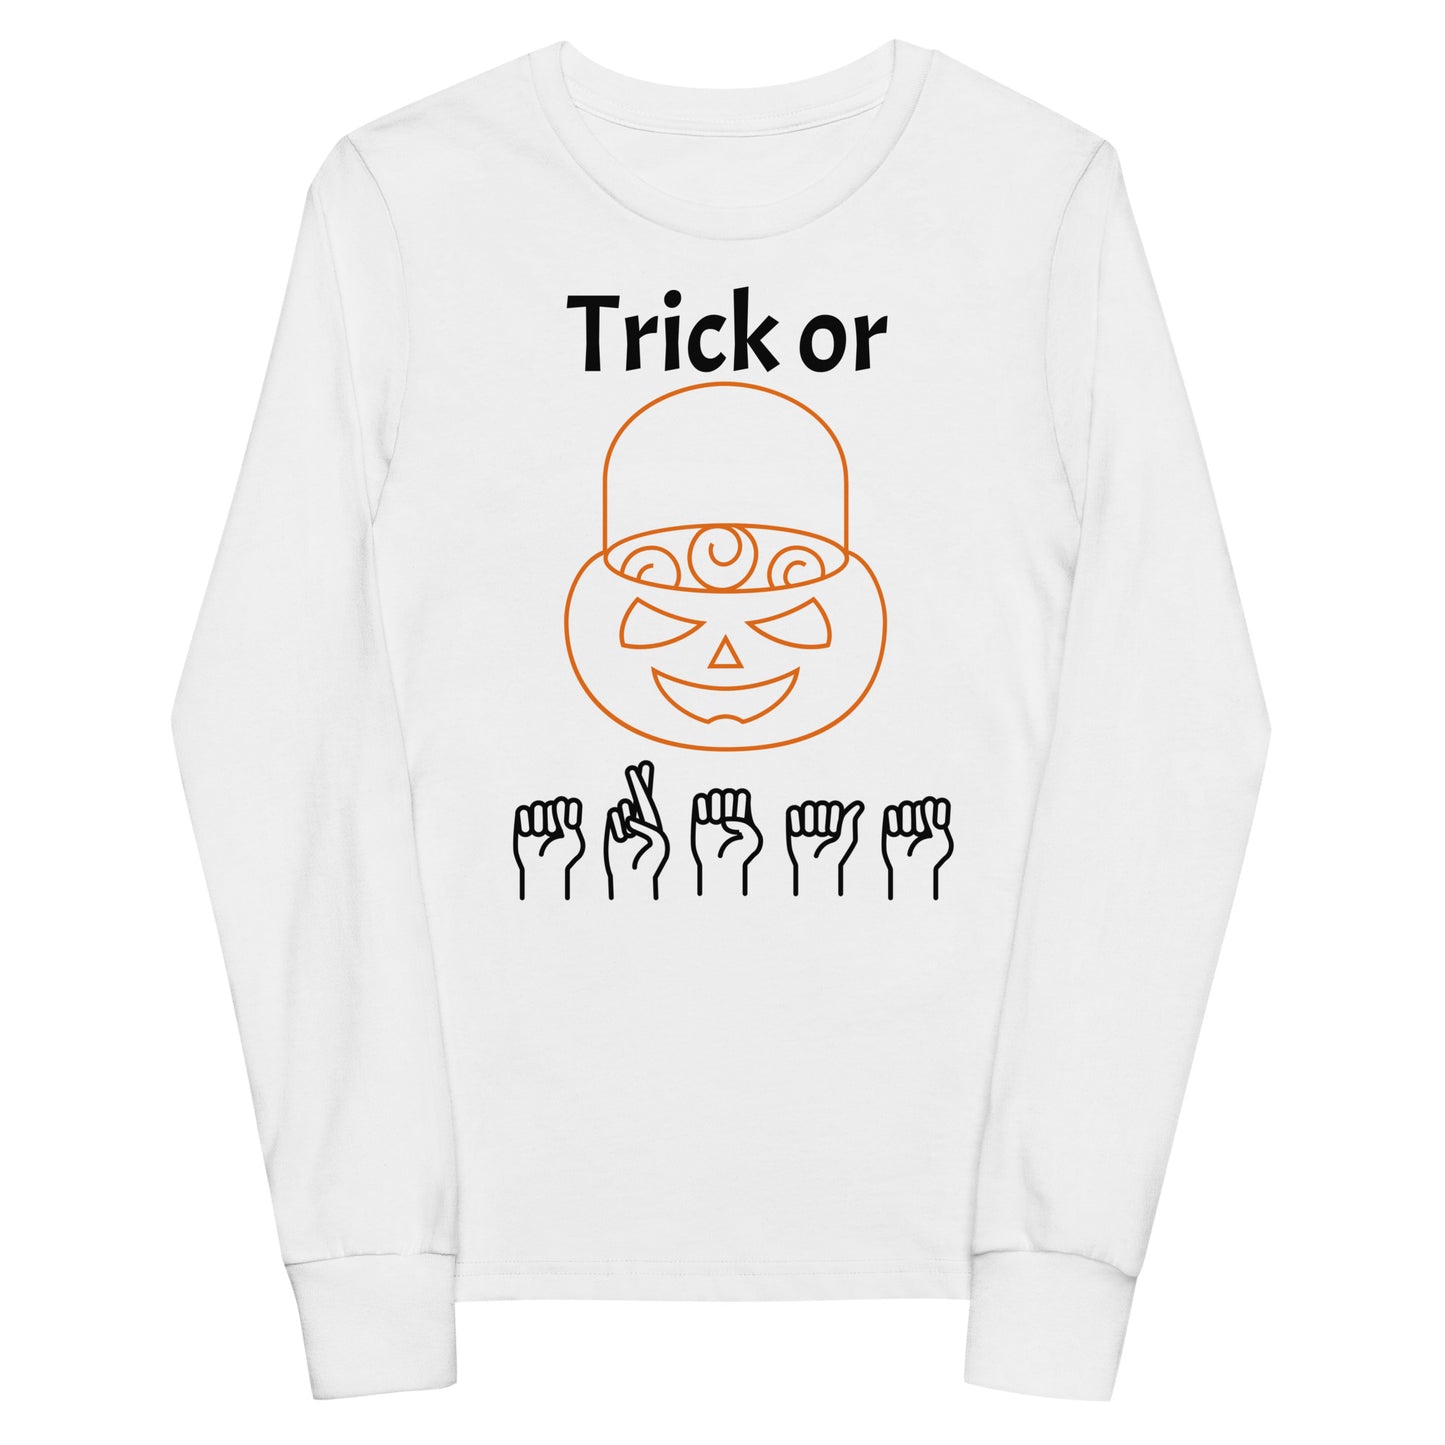 Youth long sleeve Trick or Treat Tee